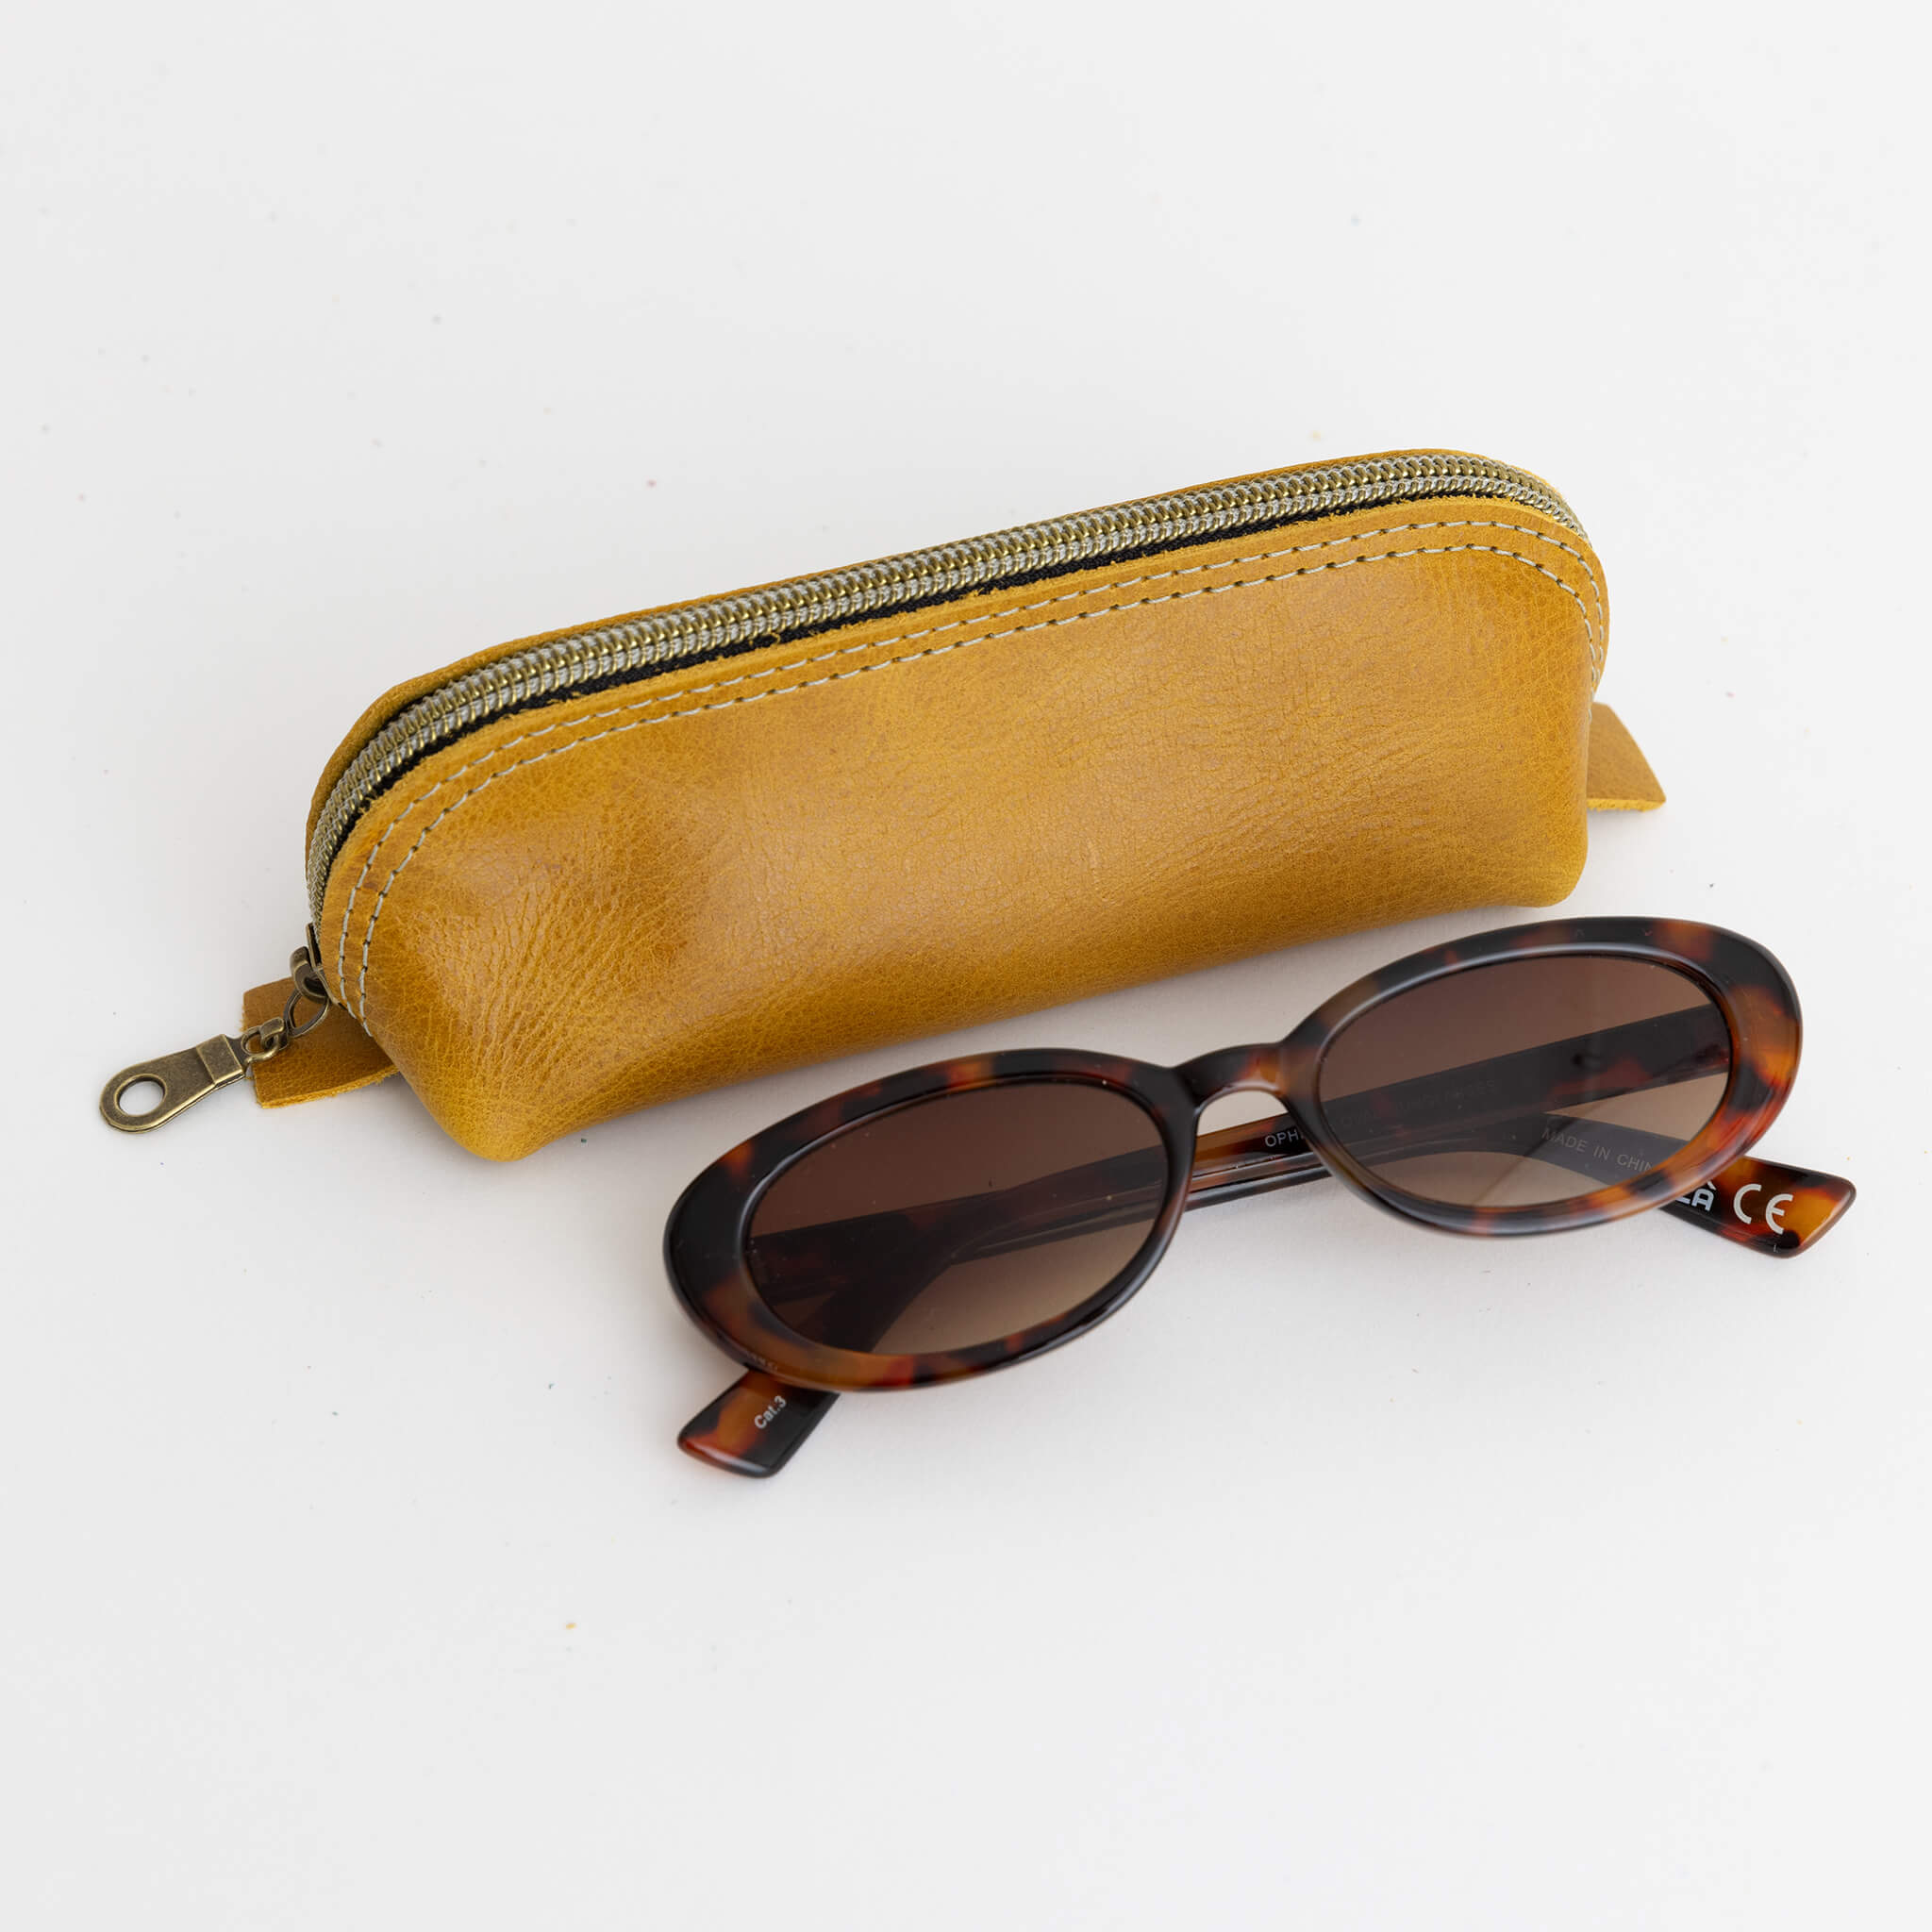 shelby pouch - zipper case - handmade leather - honey front view